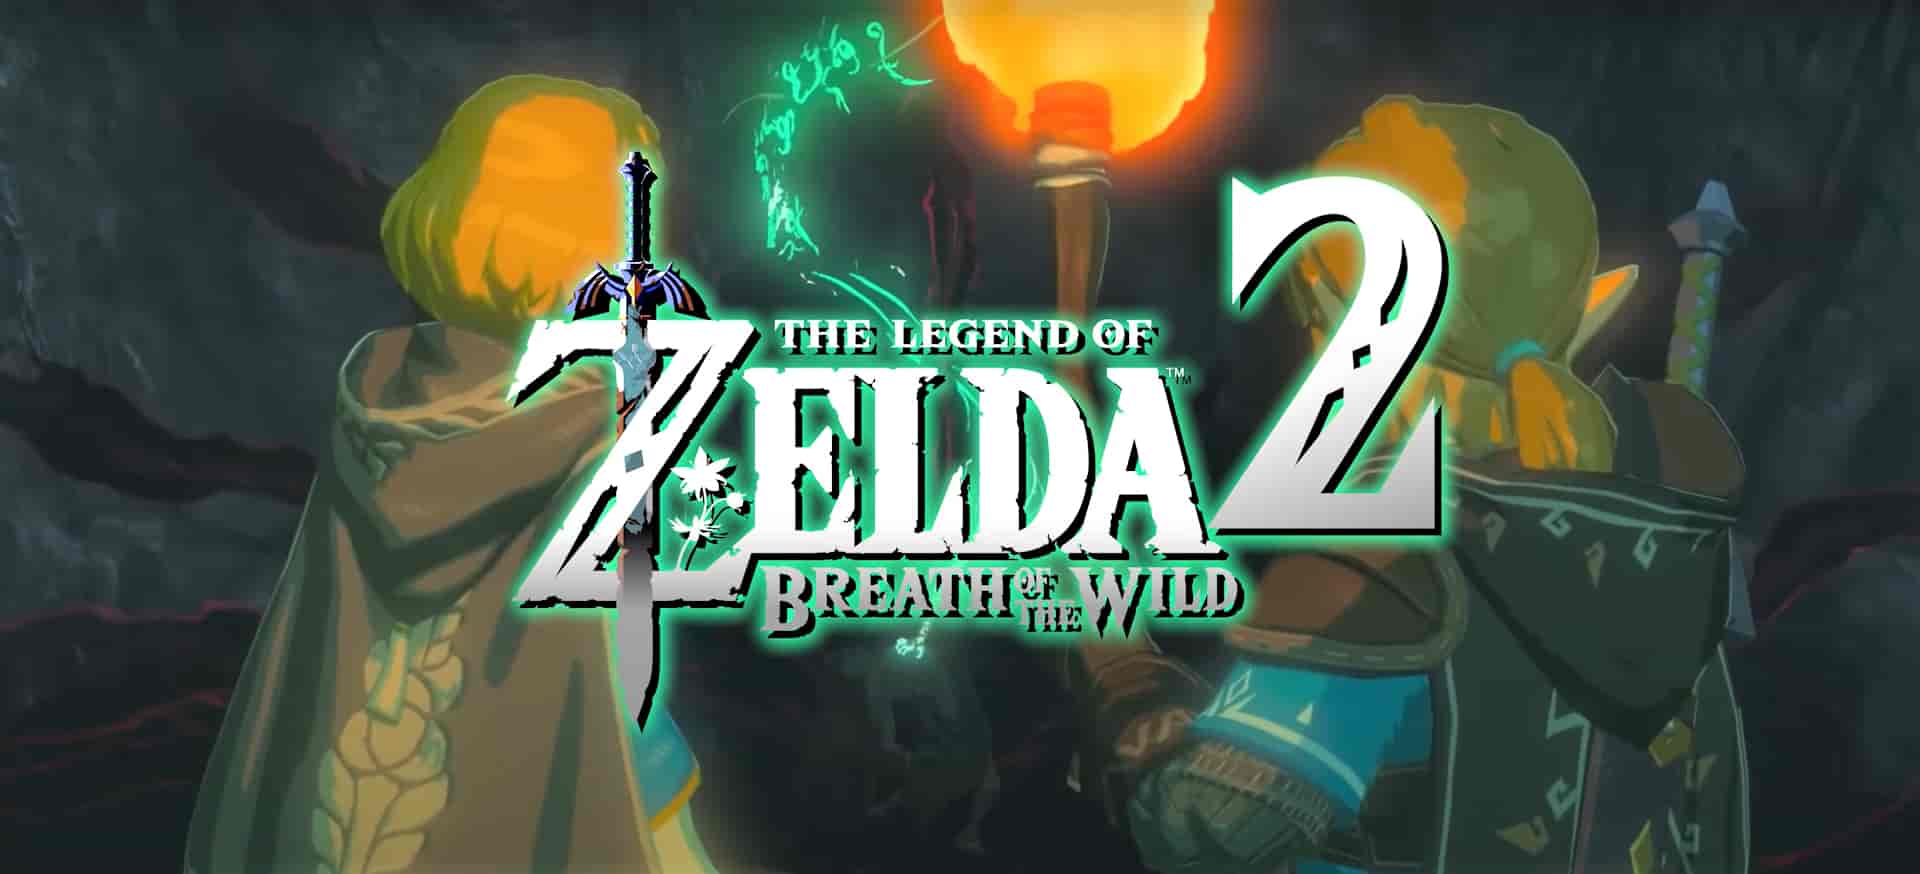 is the legend of zelda breath of the wild 2 out